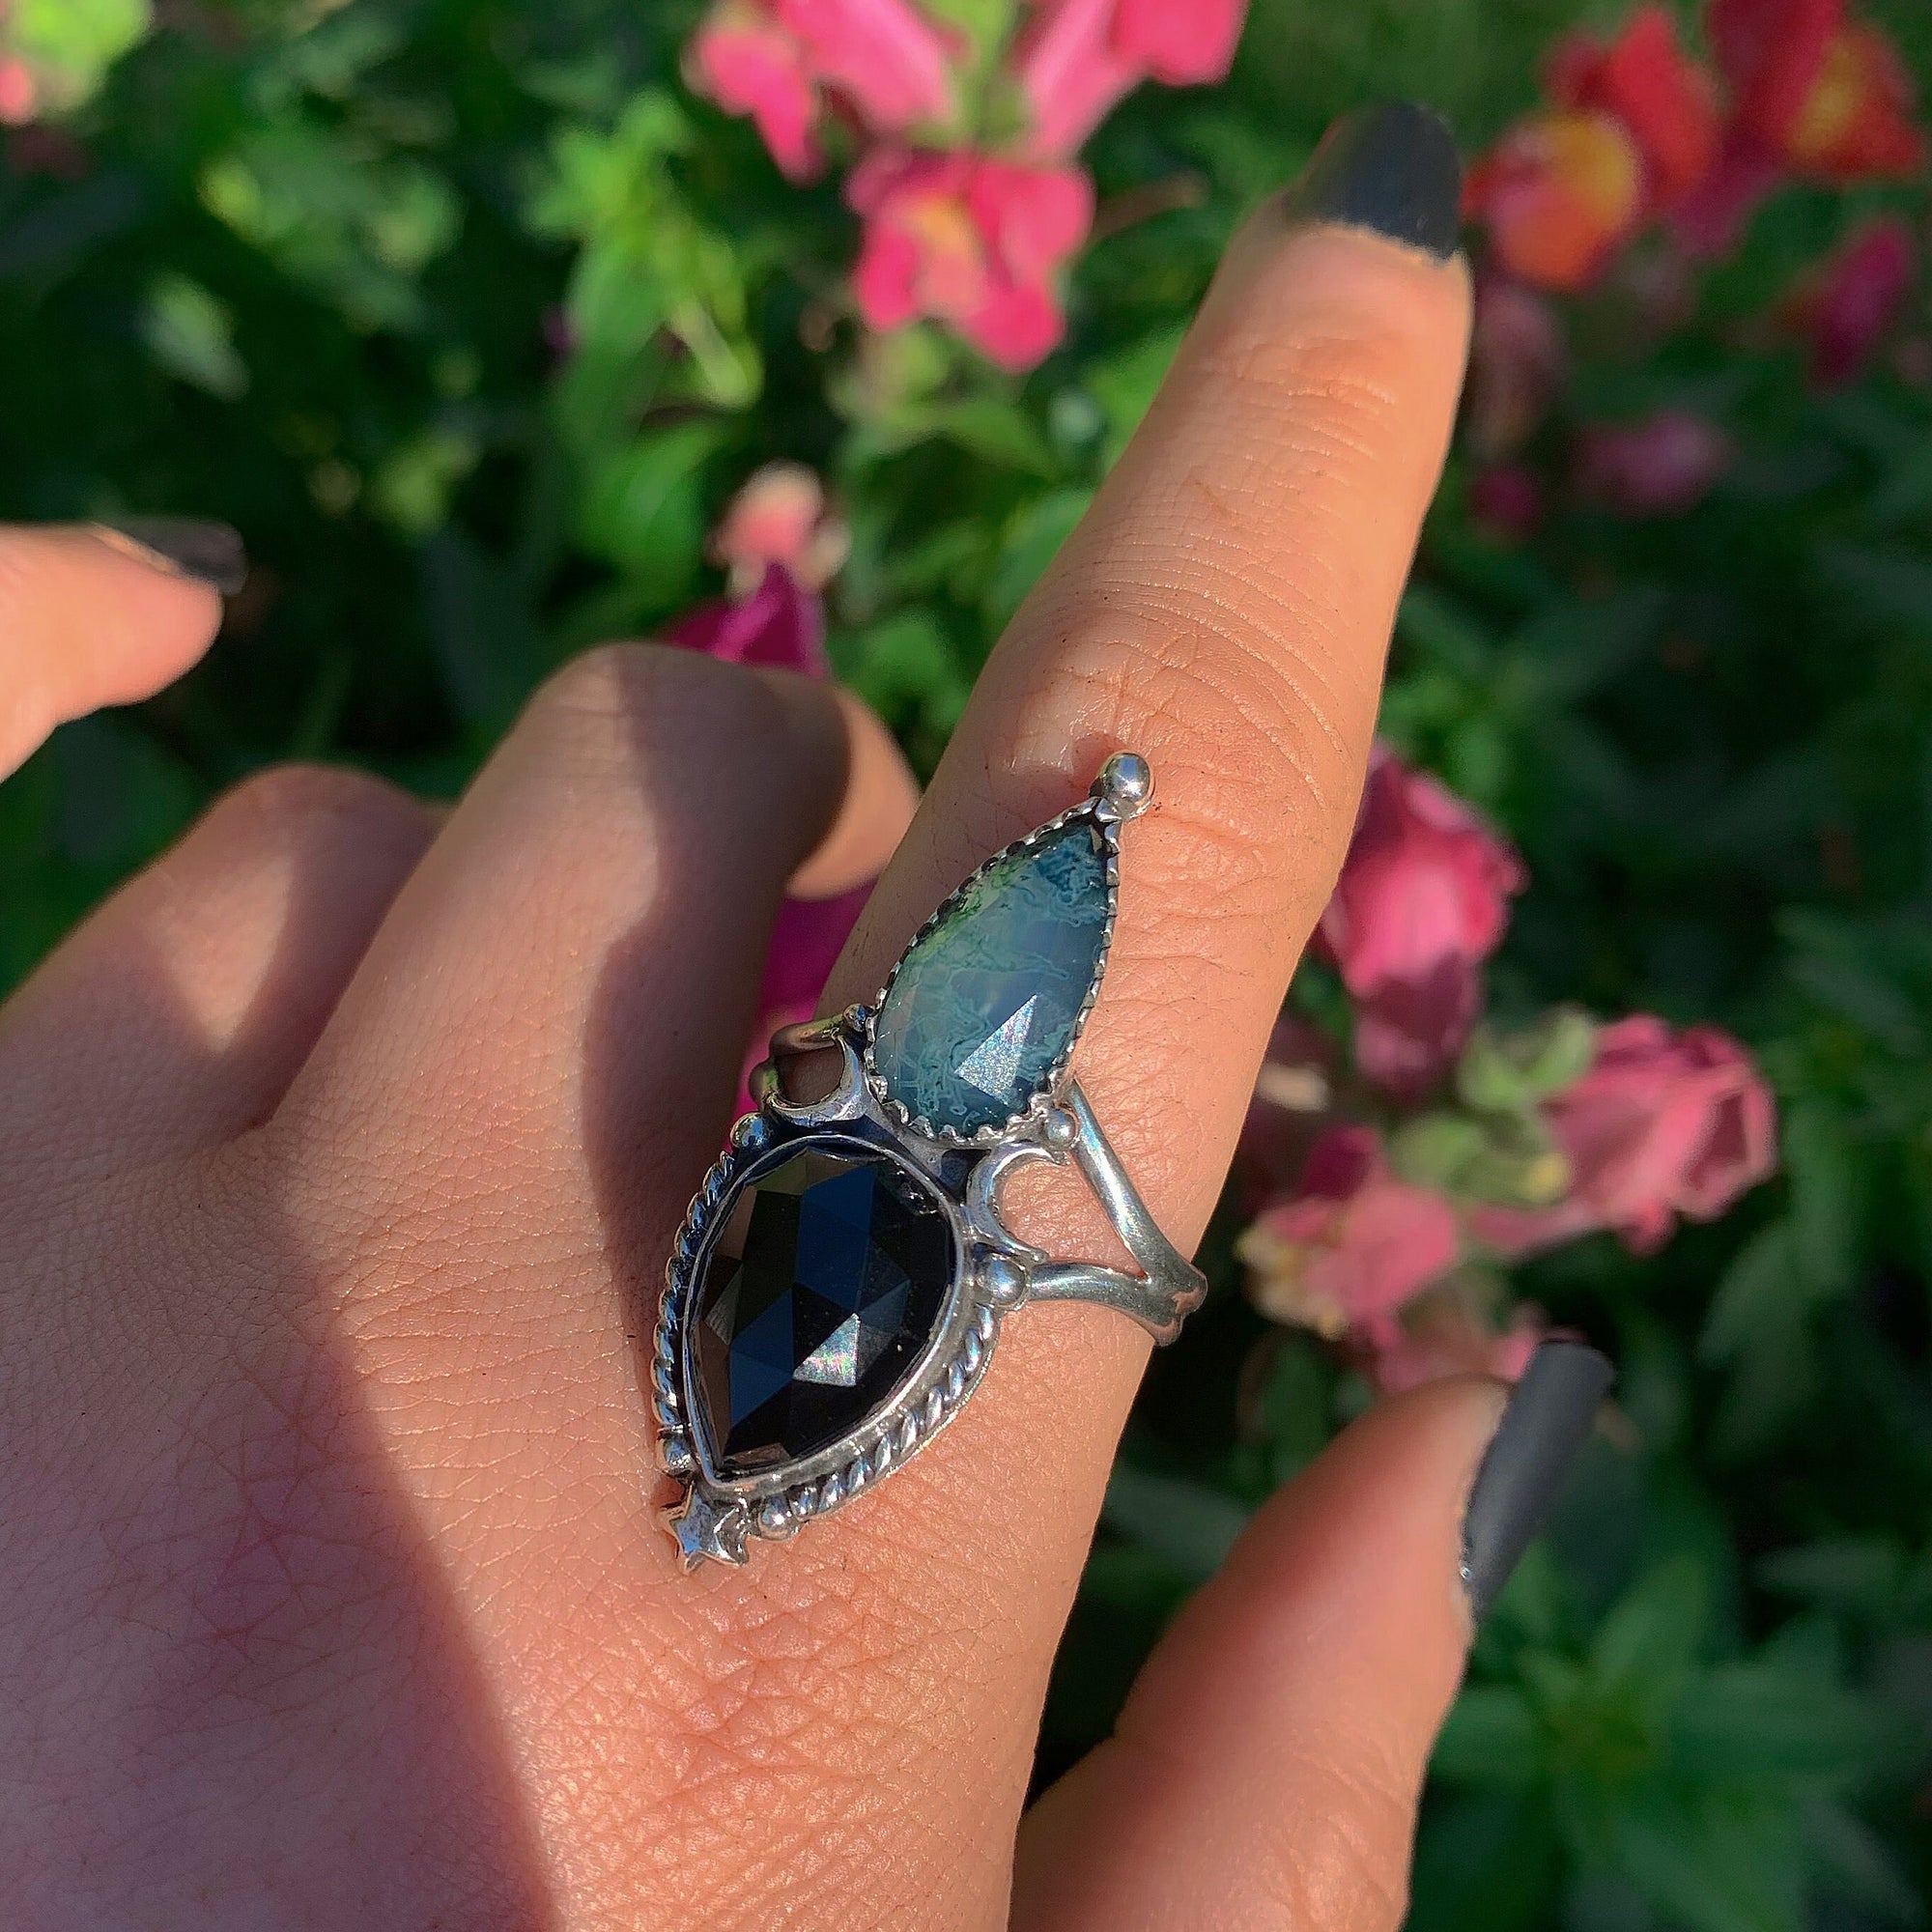 Rose Cut Moss Agate & Black Onyx Ring - Size 11 1/2 - Sterling Silver - Faceted Moss Agate Ring - Crescent Moon Ring - OOAK Forest Jewellery